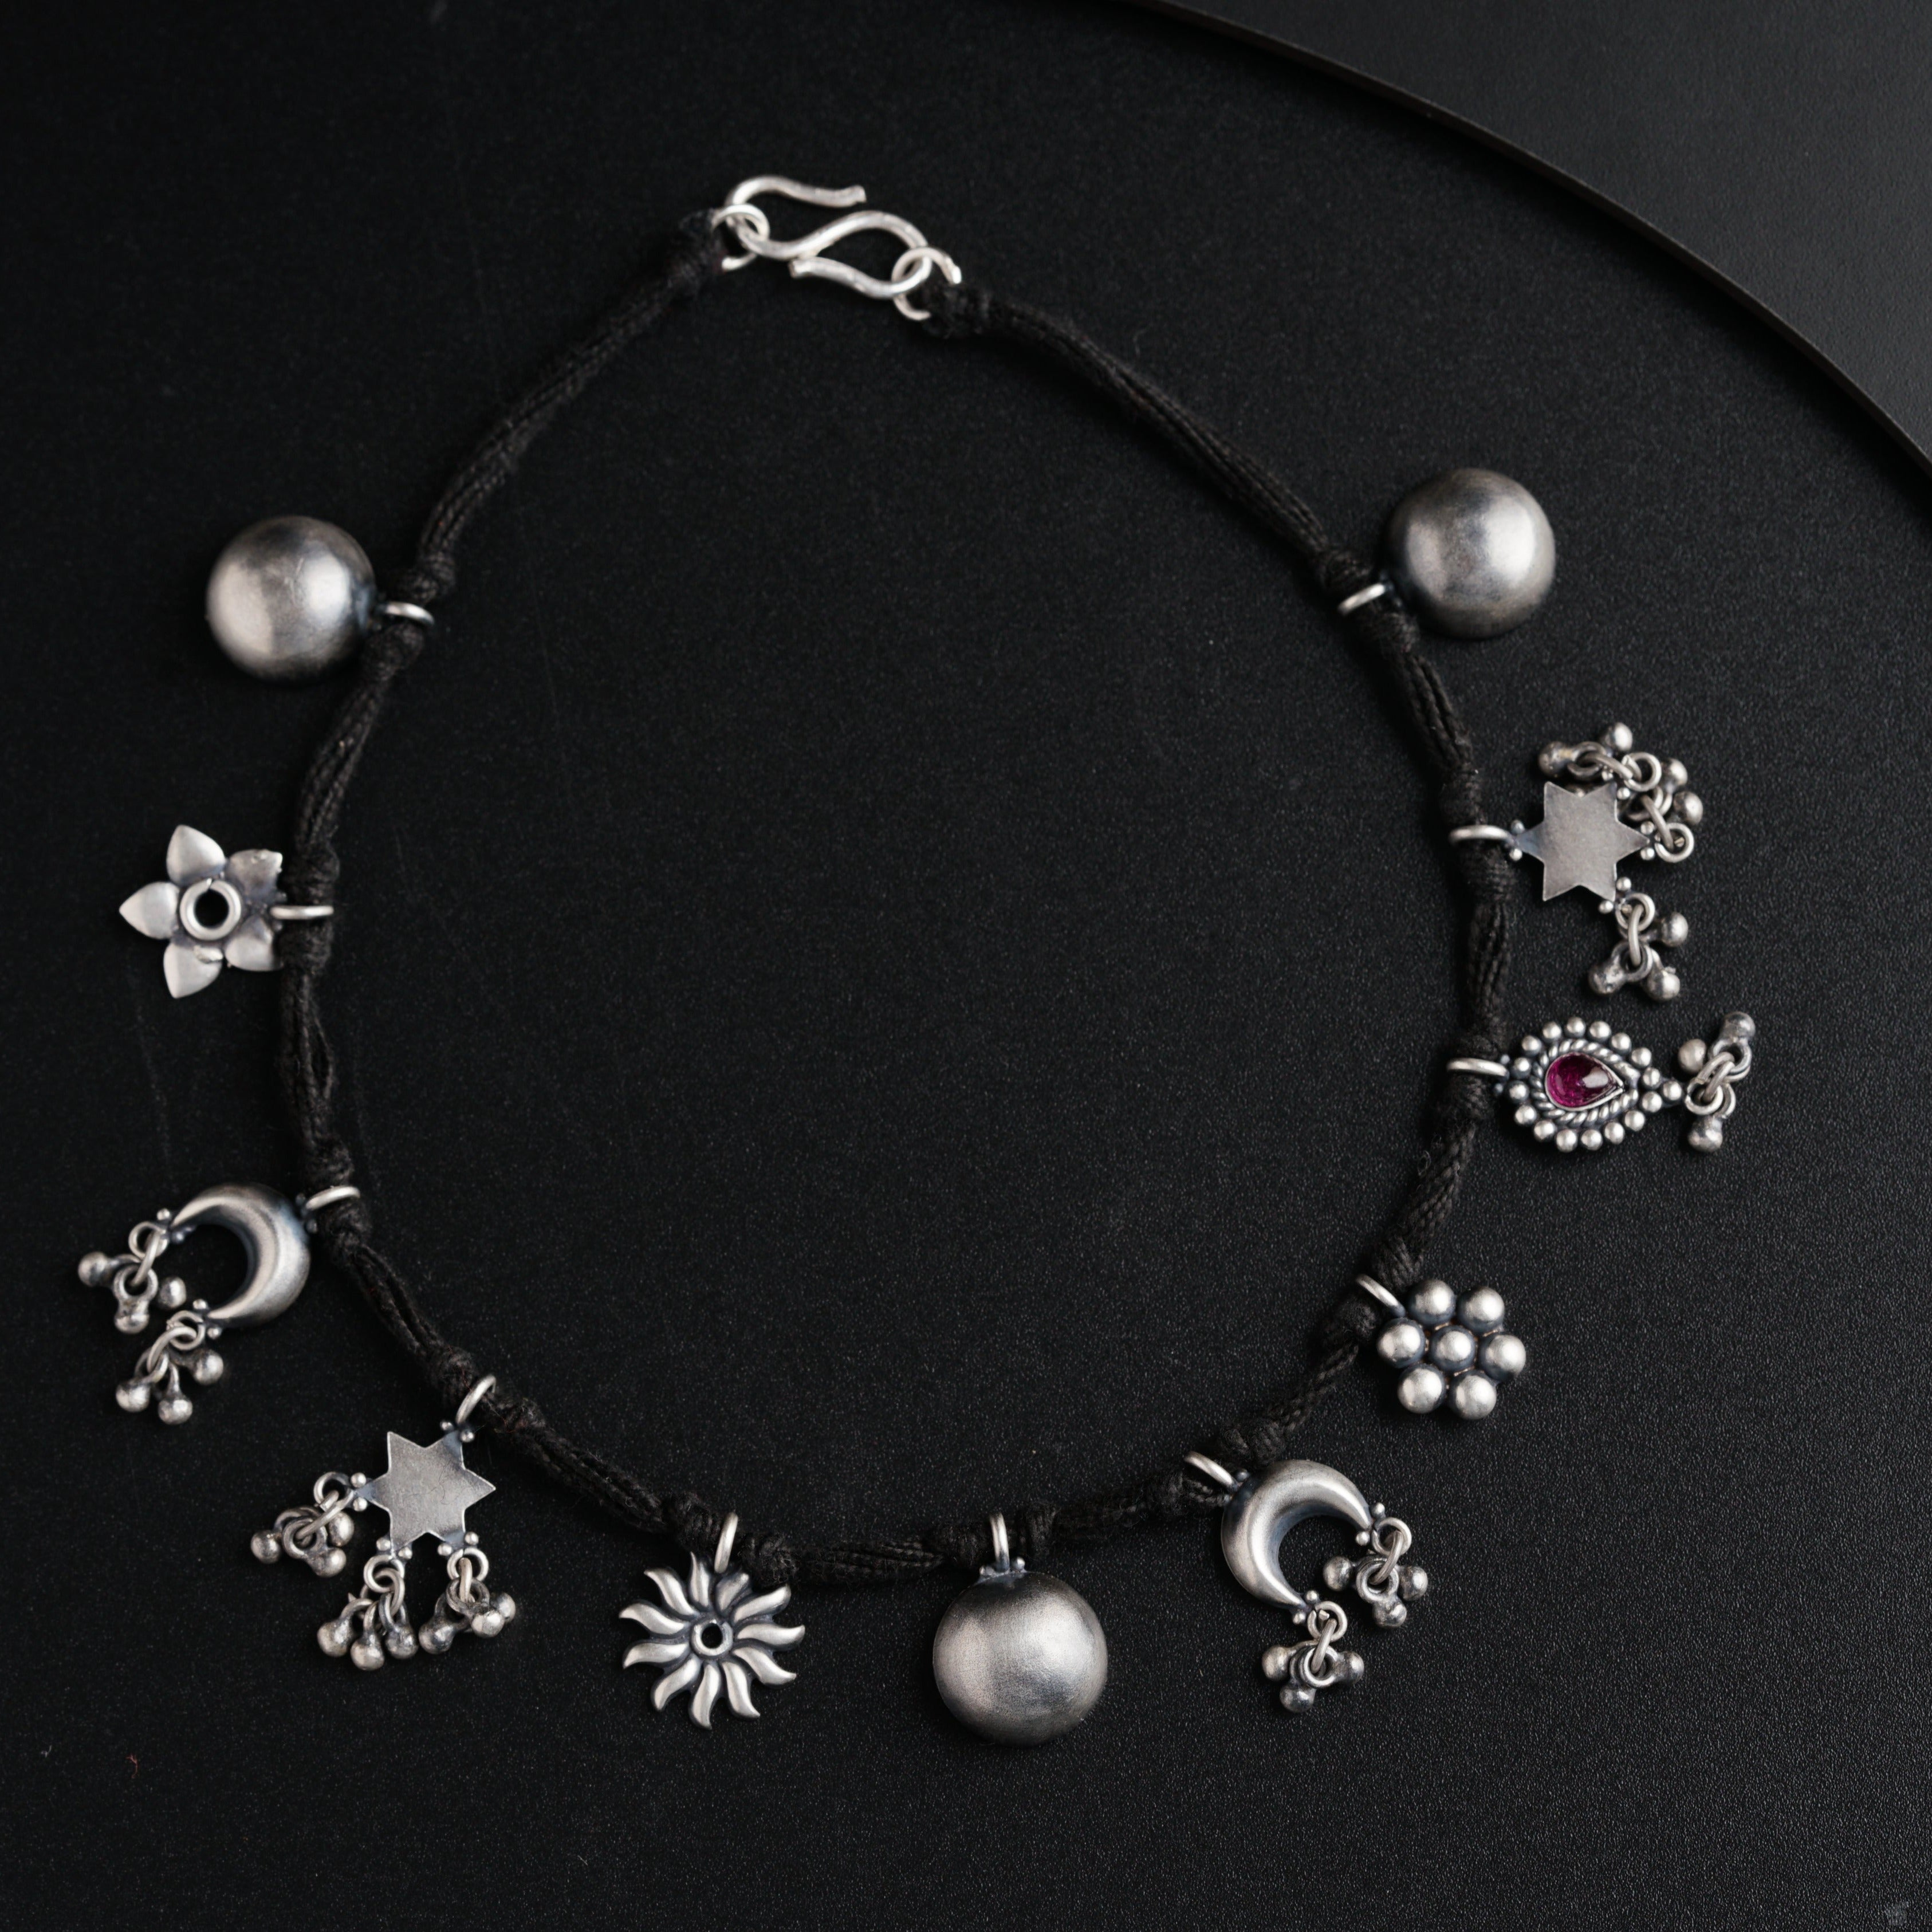 a black string bracelet with silver beads and charms